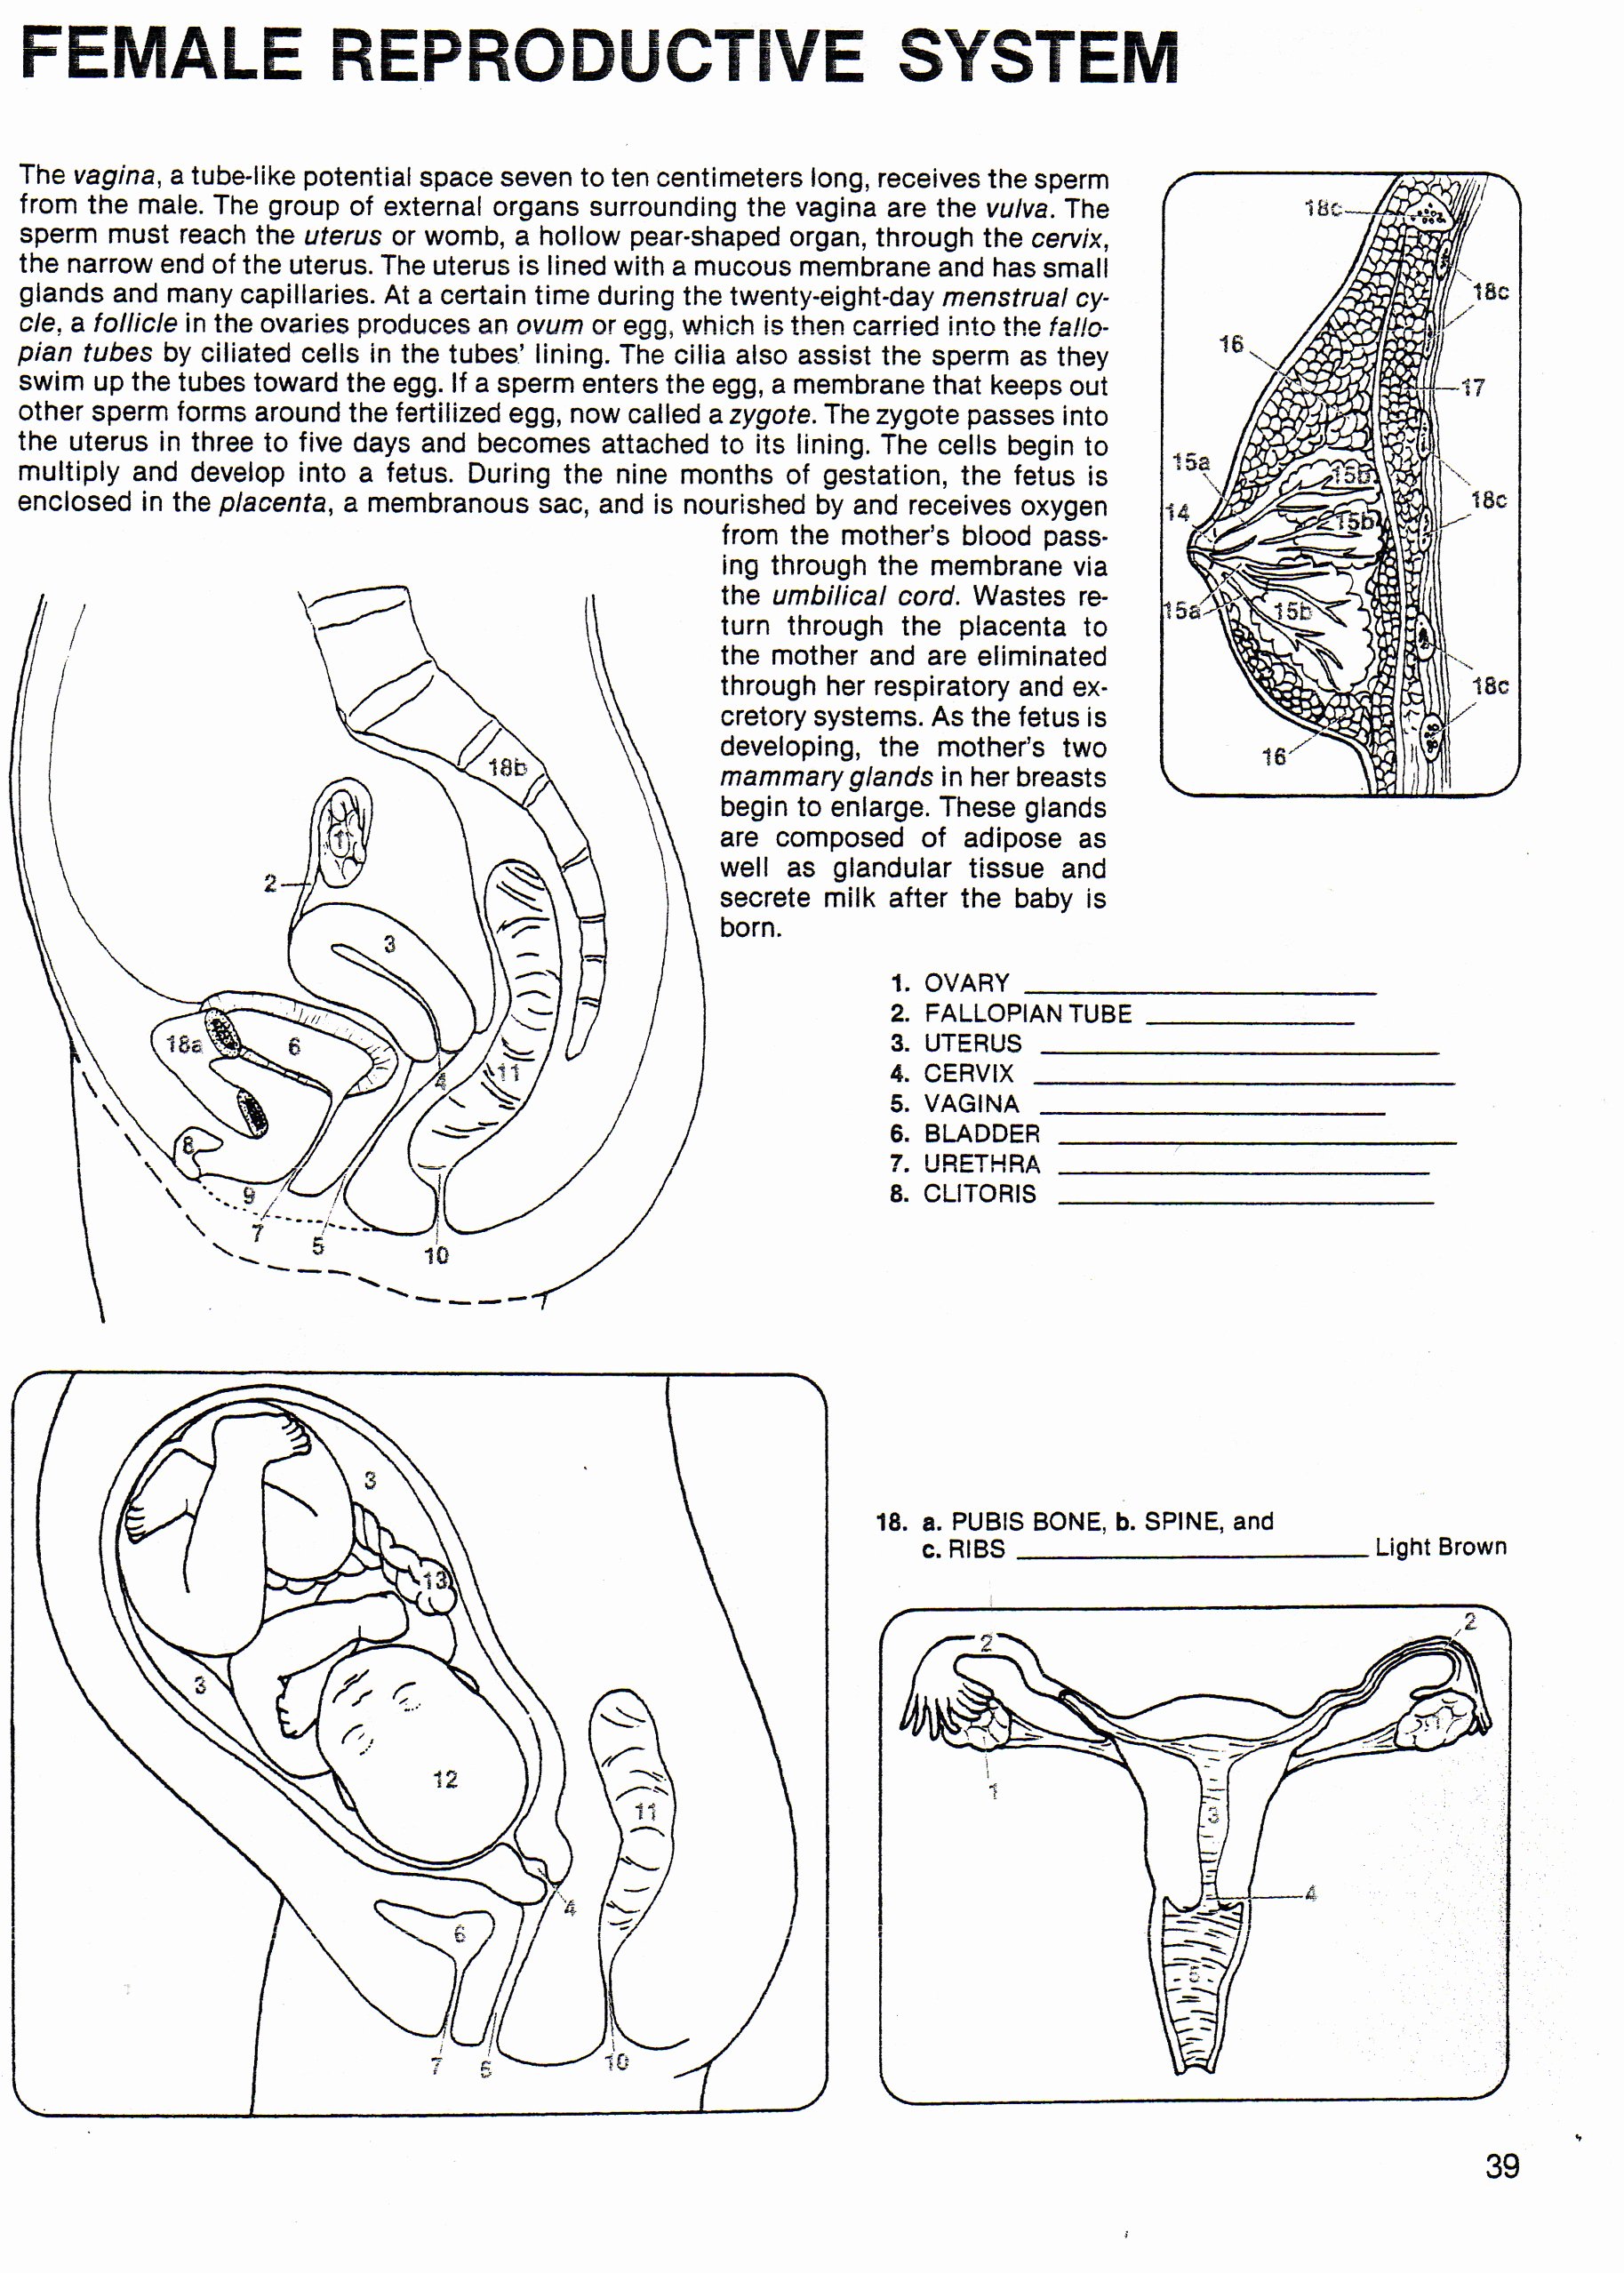 The Female Reproductive System Worksheet Best Of Human Growth &amp; Development south Junior High School